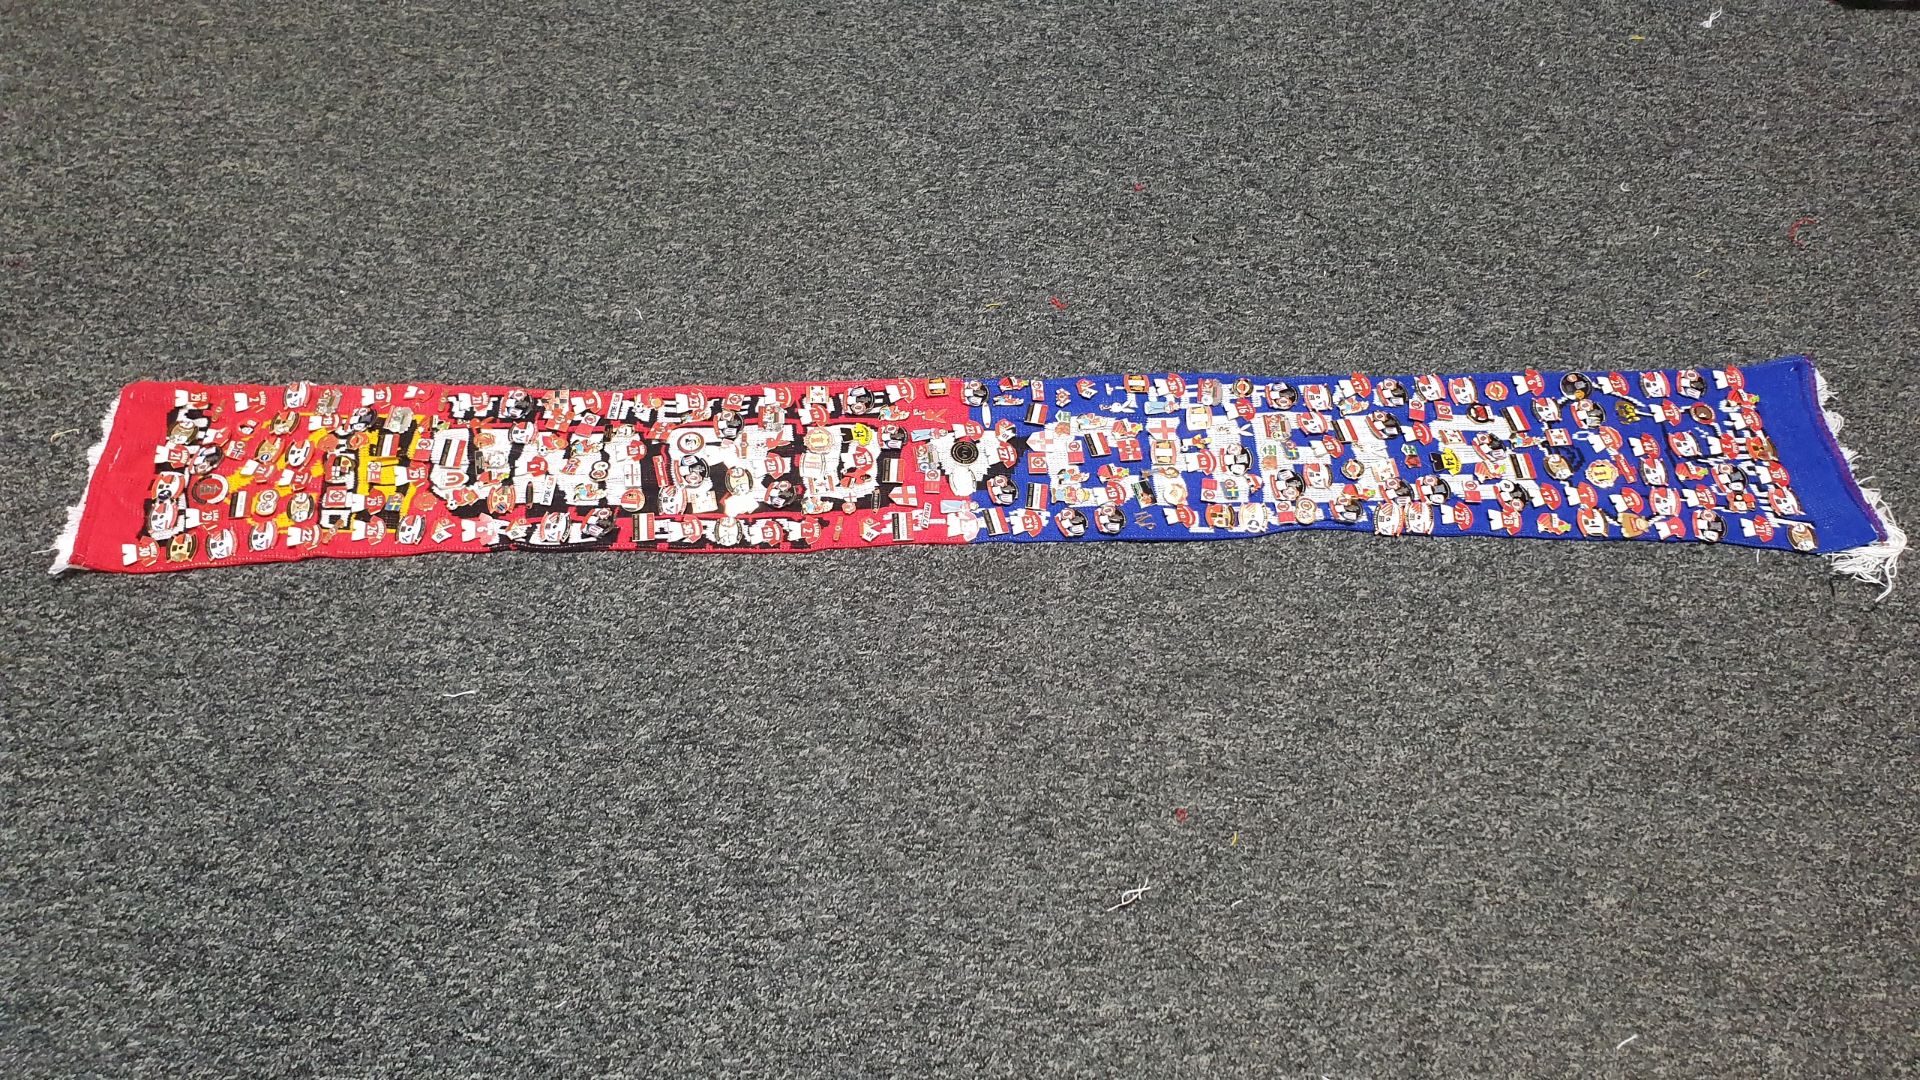 MANCHESTER UNITED SCARF CONTAINING APPROX 260 X PIN BADGES IE FA CUP WINNER 2018, WE HATE CITY,